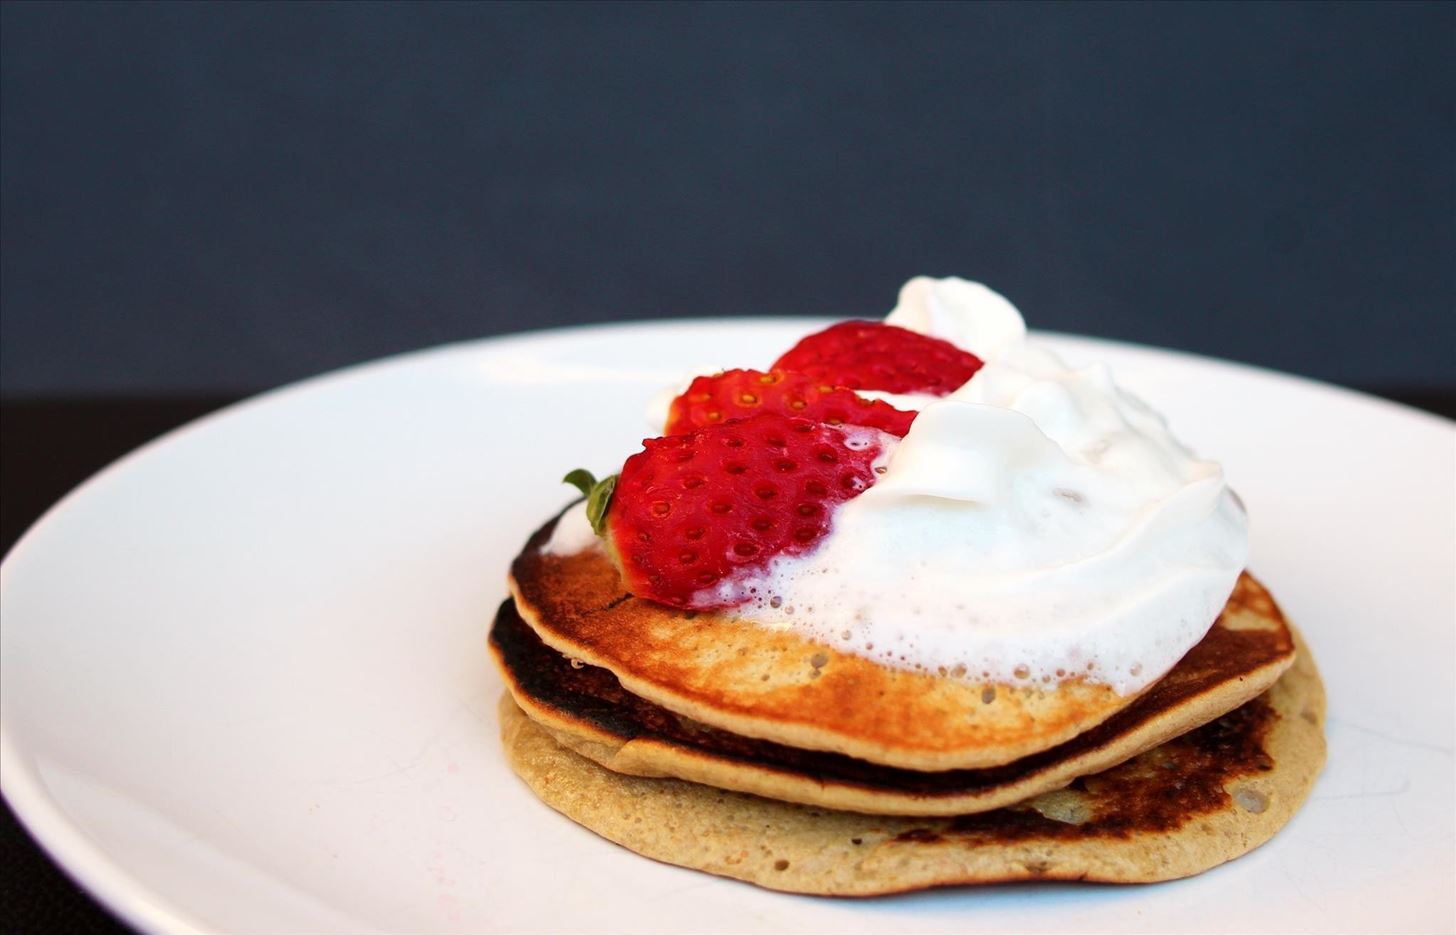 How to Make 2-Ingredient Pancakes That Are High Protein, Low-Carb & Gluten-Free